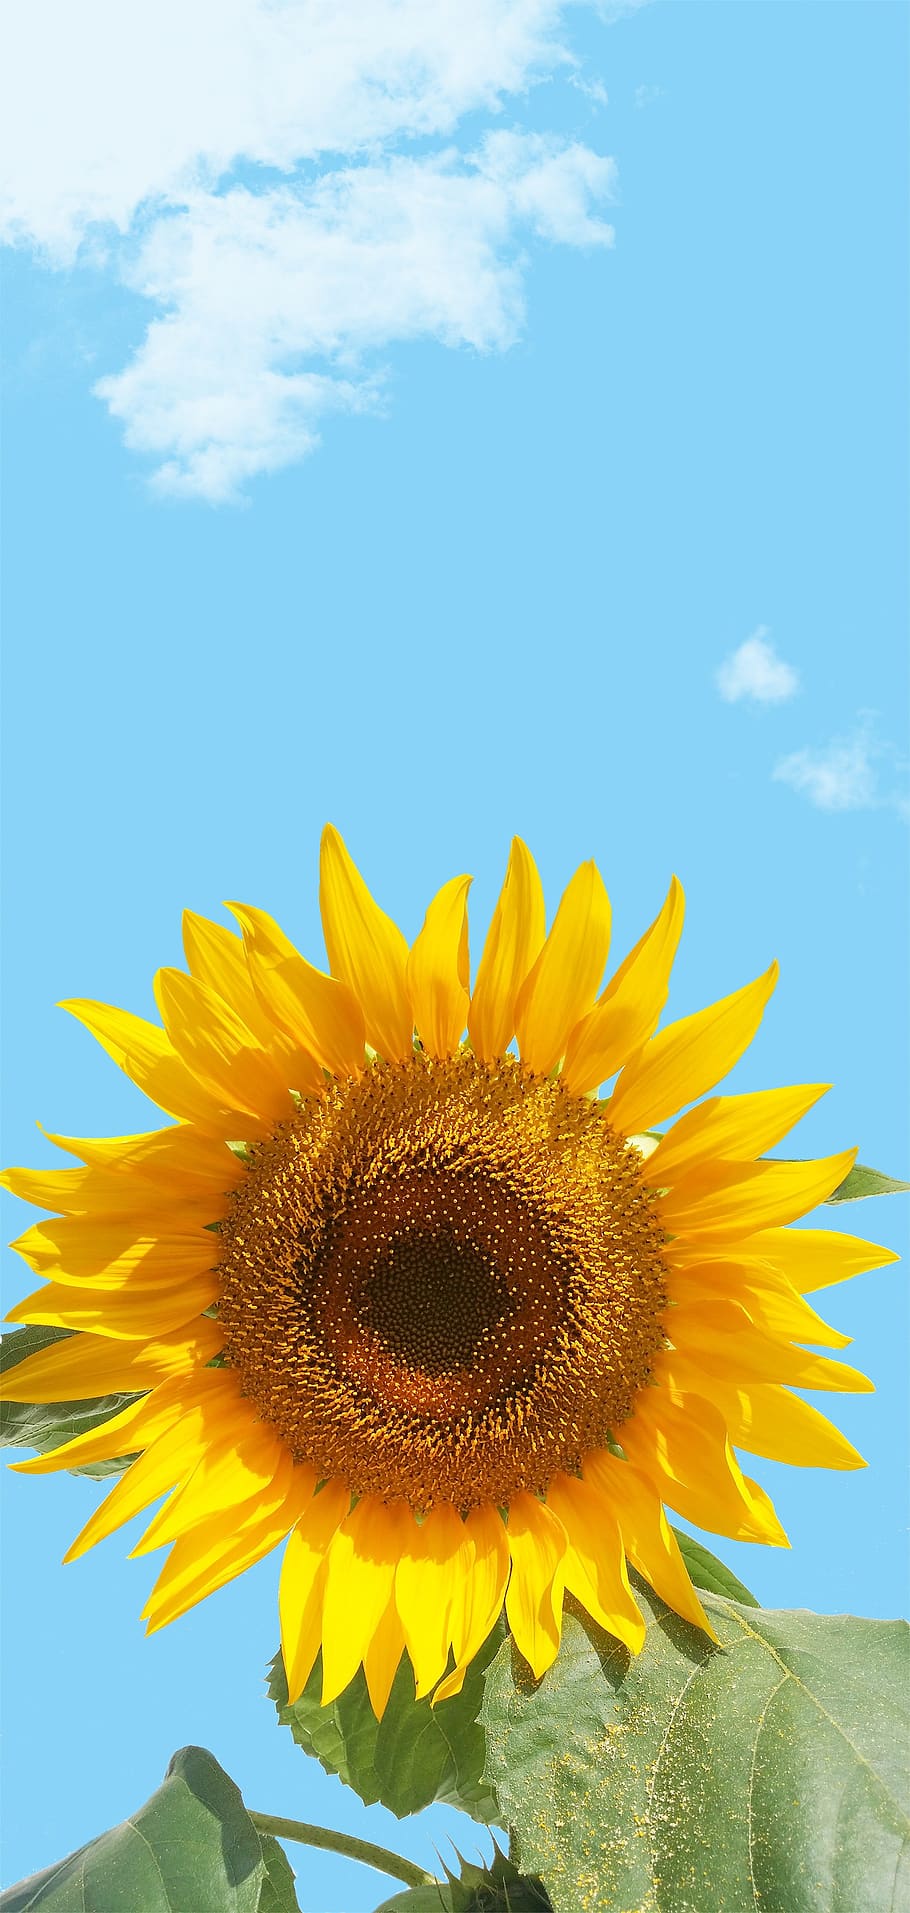 sunflower, sky, flower, yellow, background, text dom, copy space, negative space, label possibility, close up